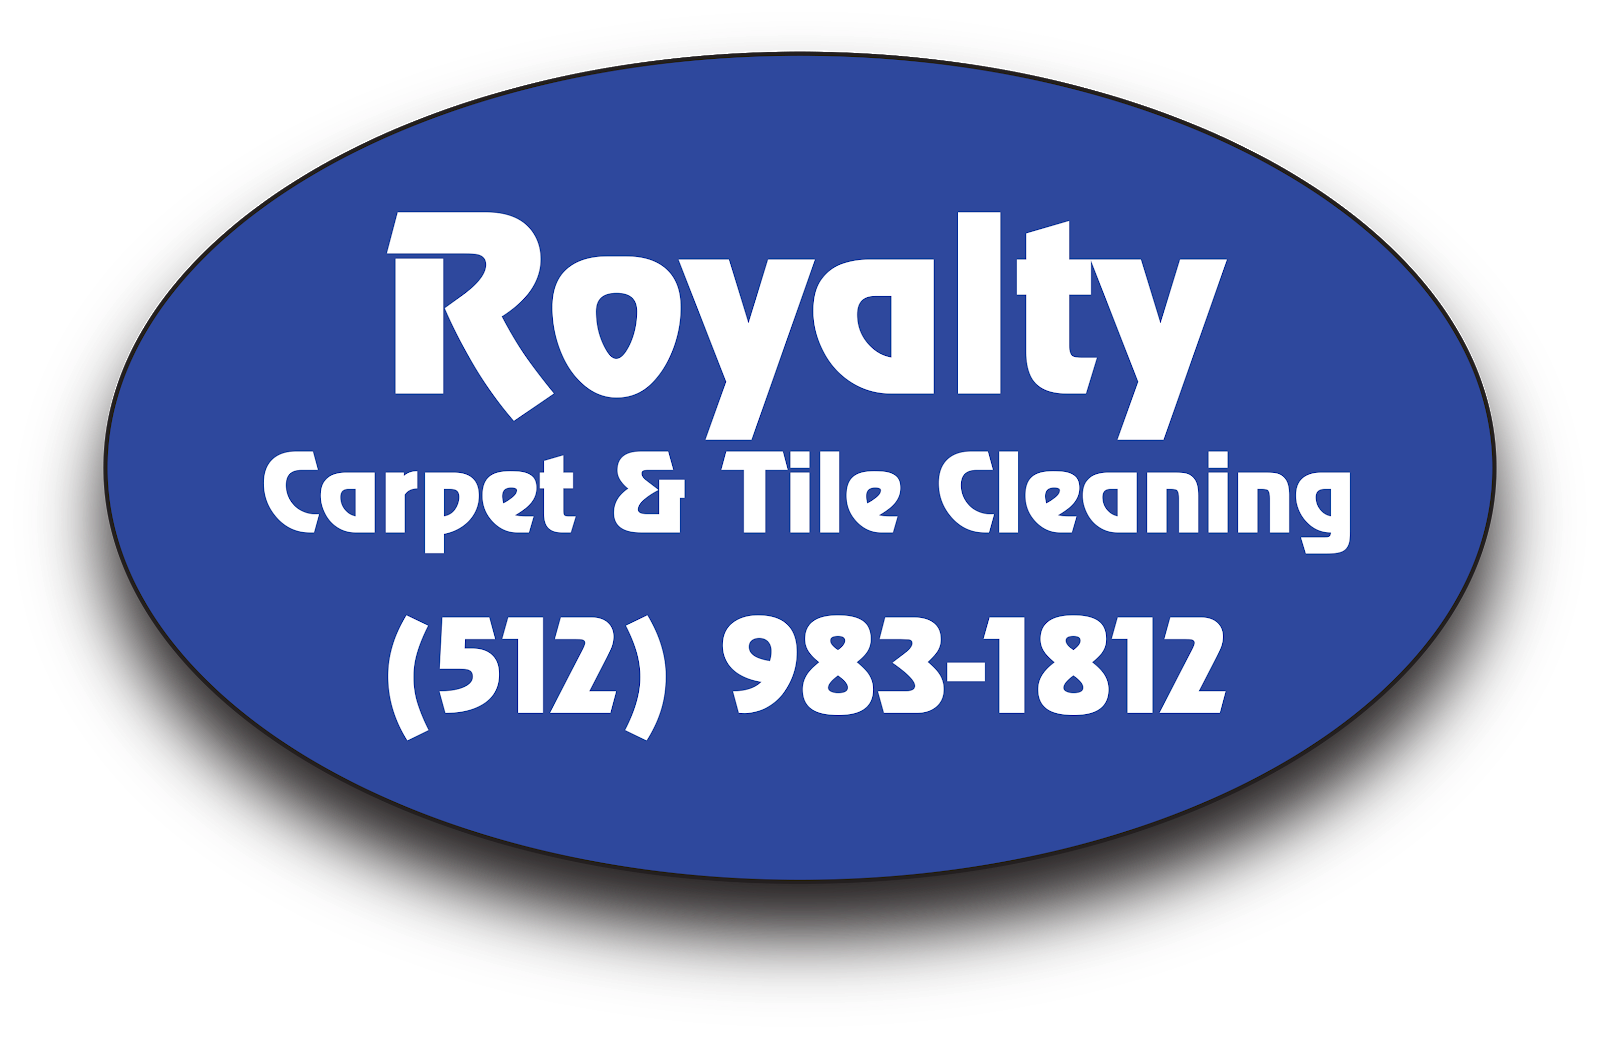 Royalty Carpet Tile Cleaning